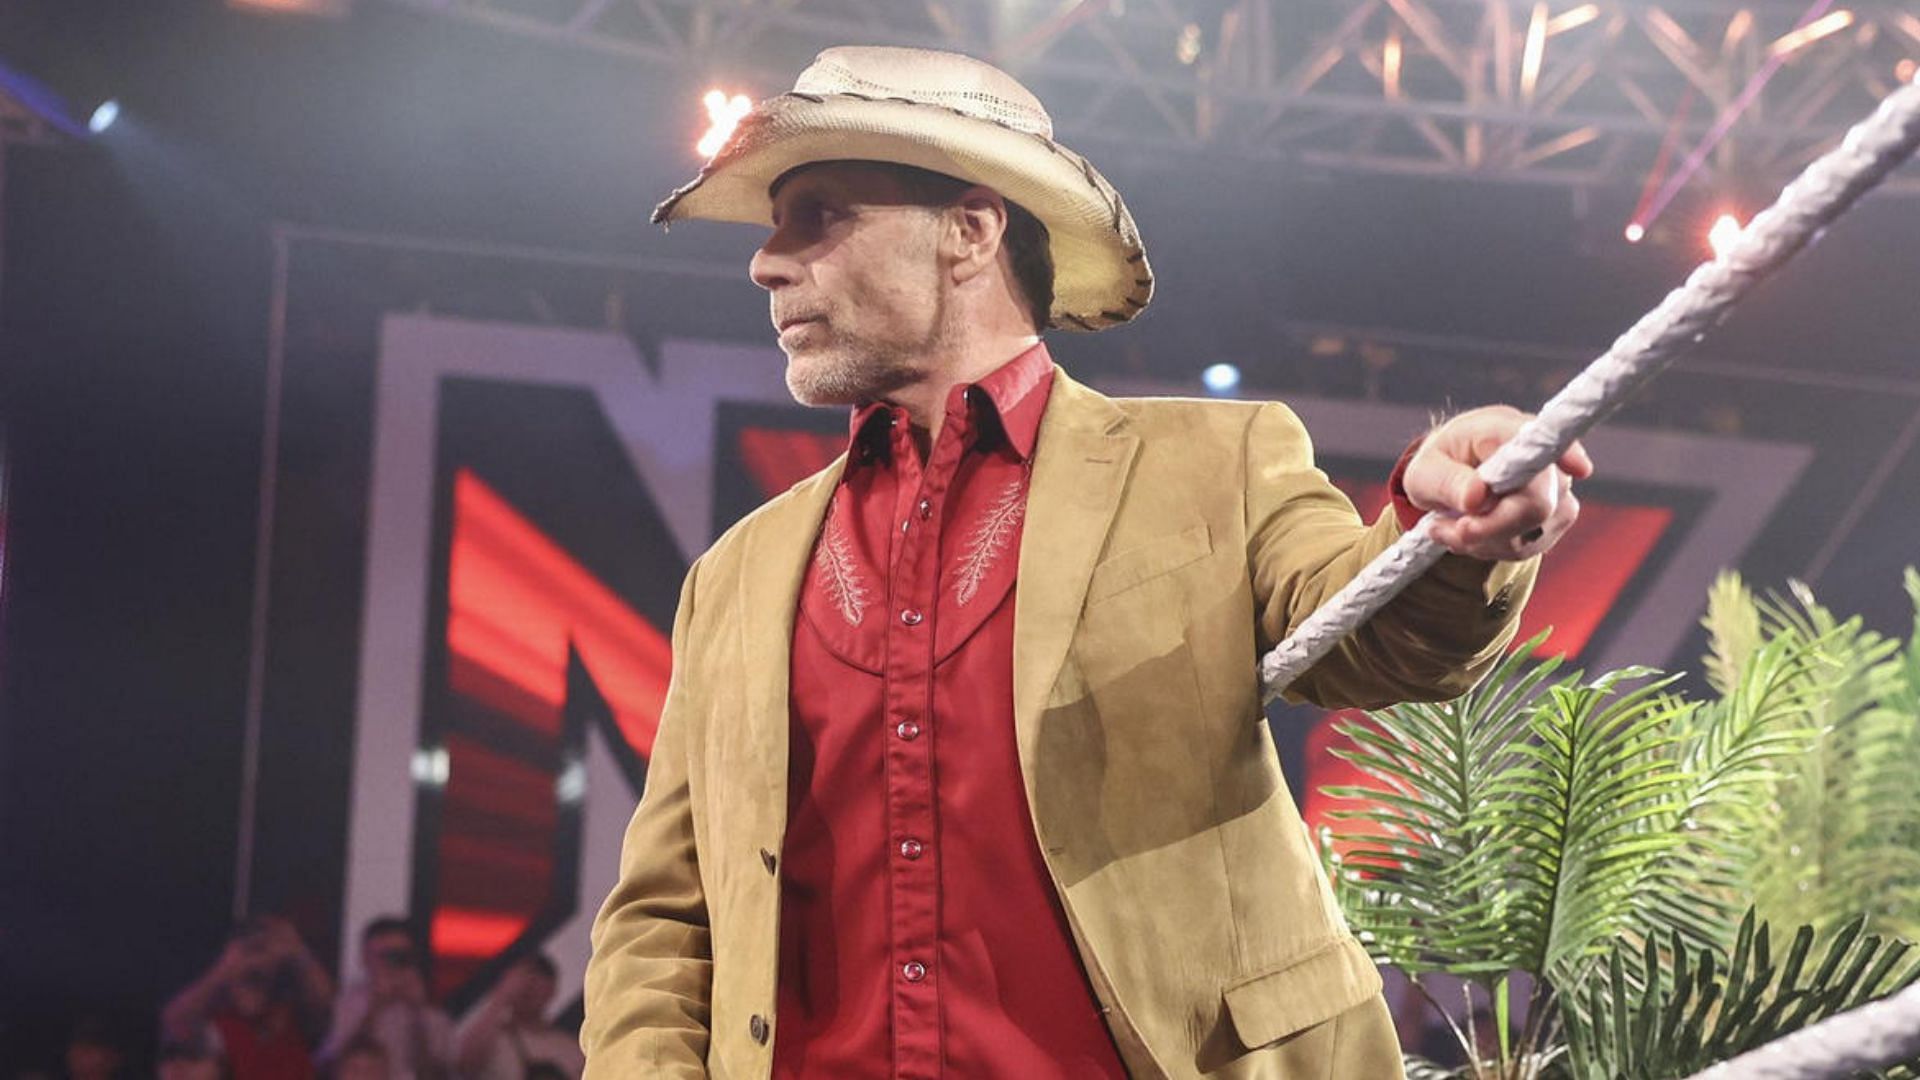 Shawn Michaels at Grayson Waller Effect on NXT!